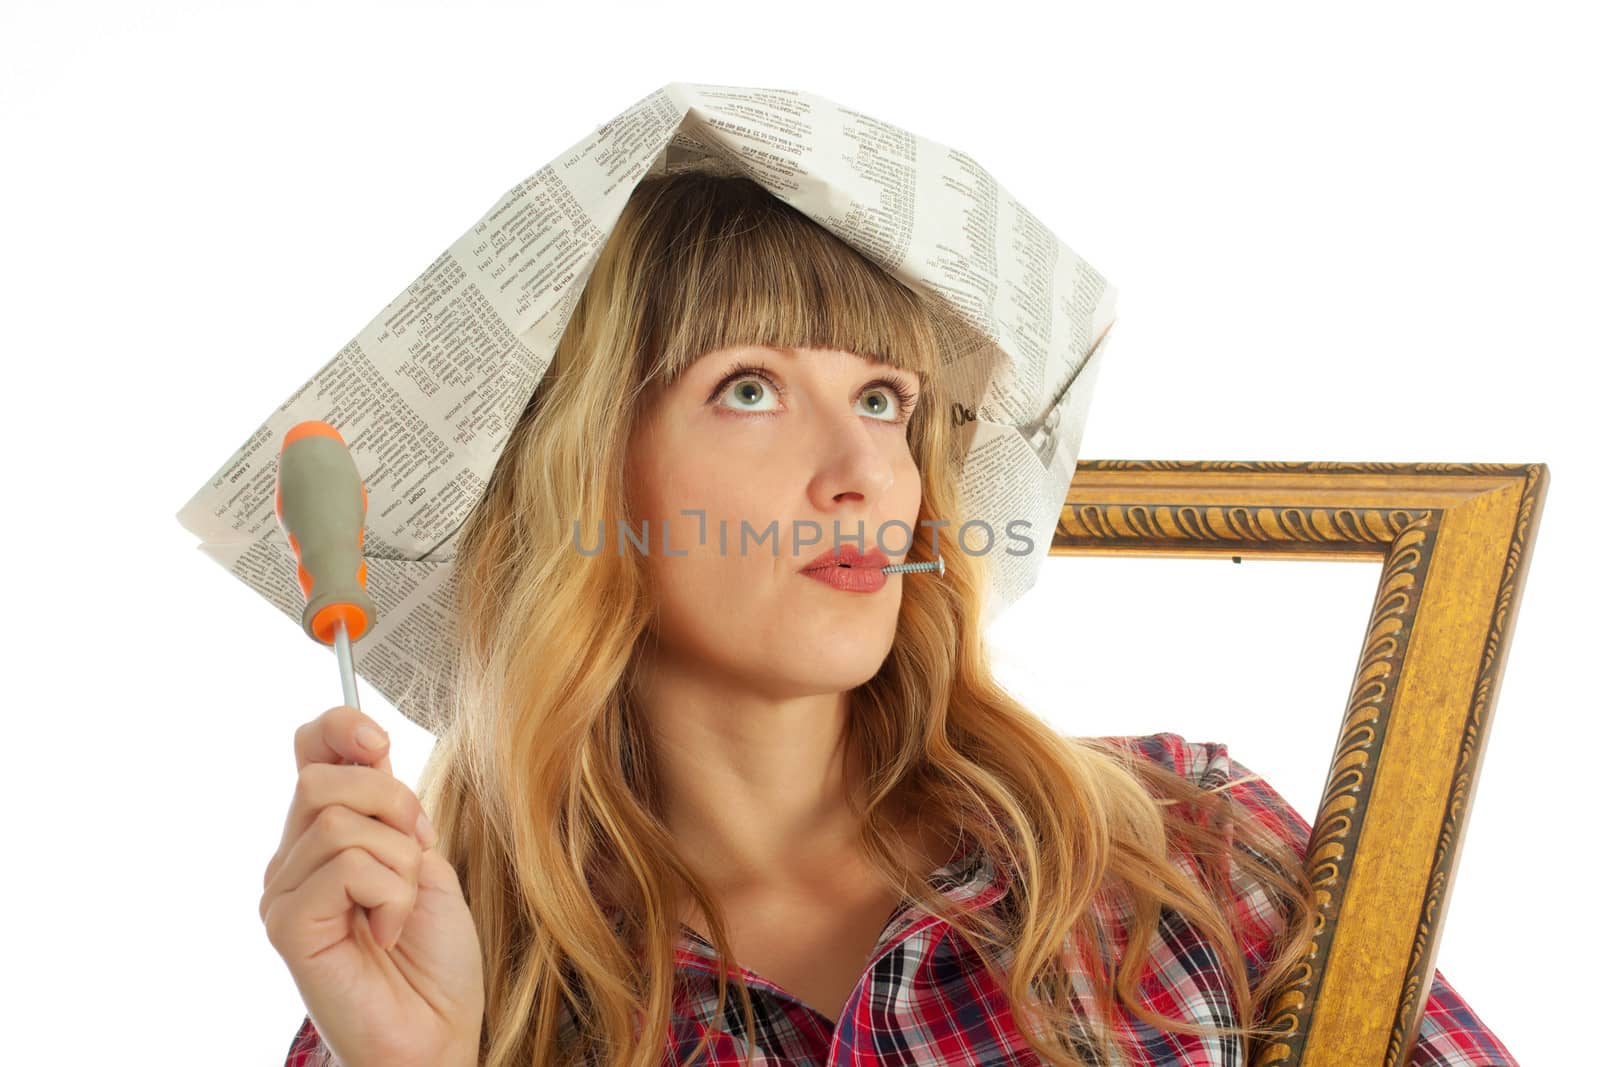 Woman engaged in small home repair on a white background